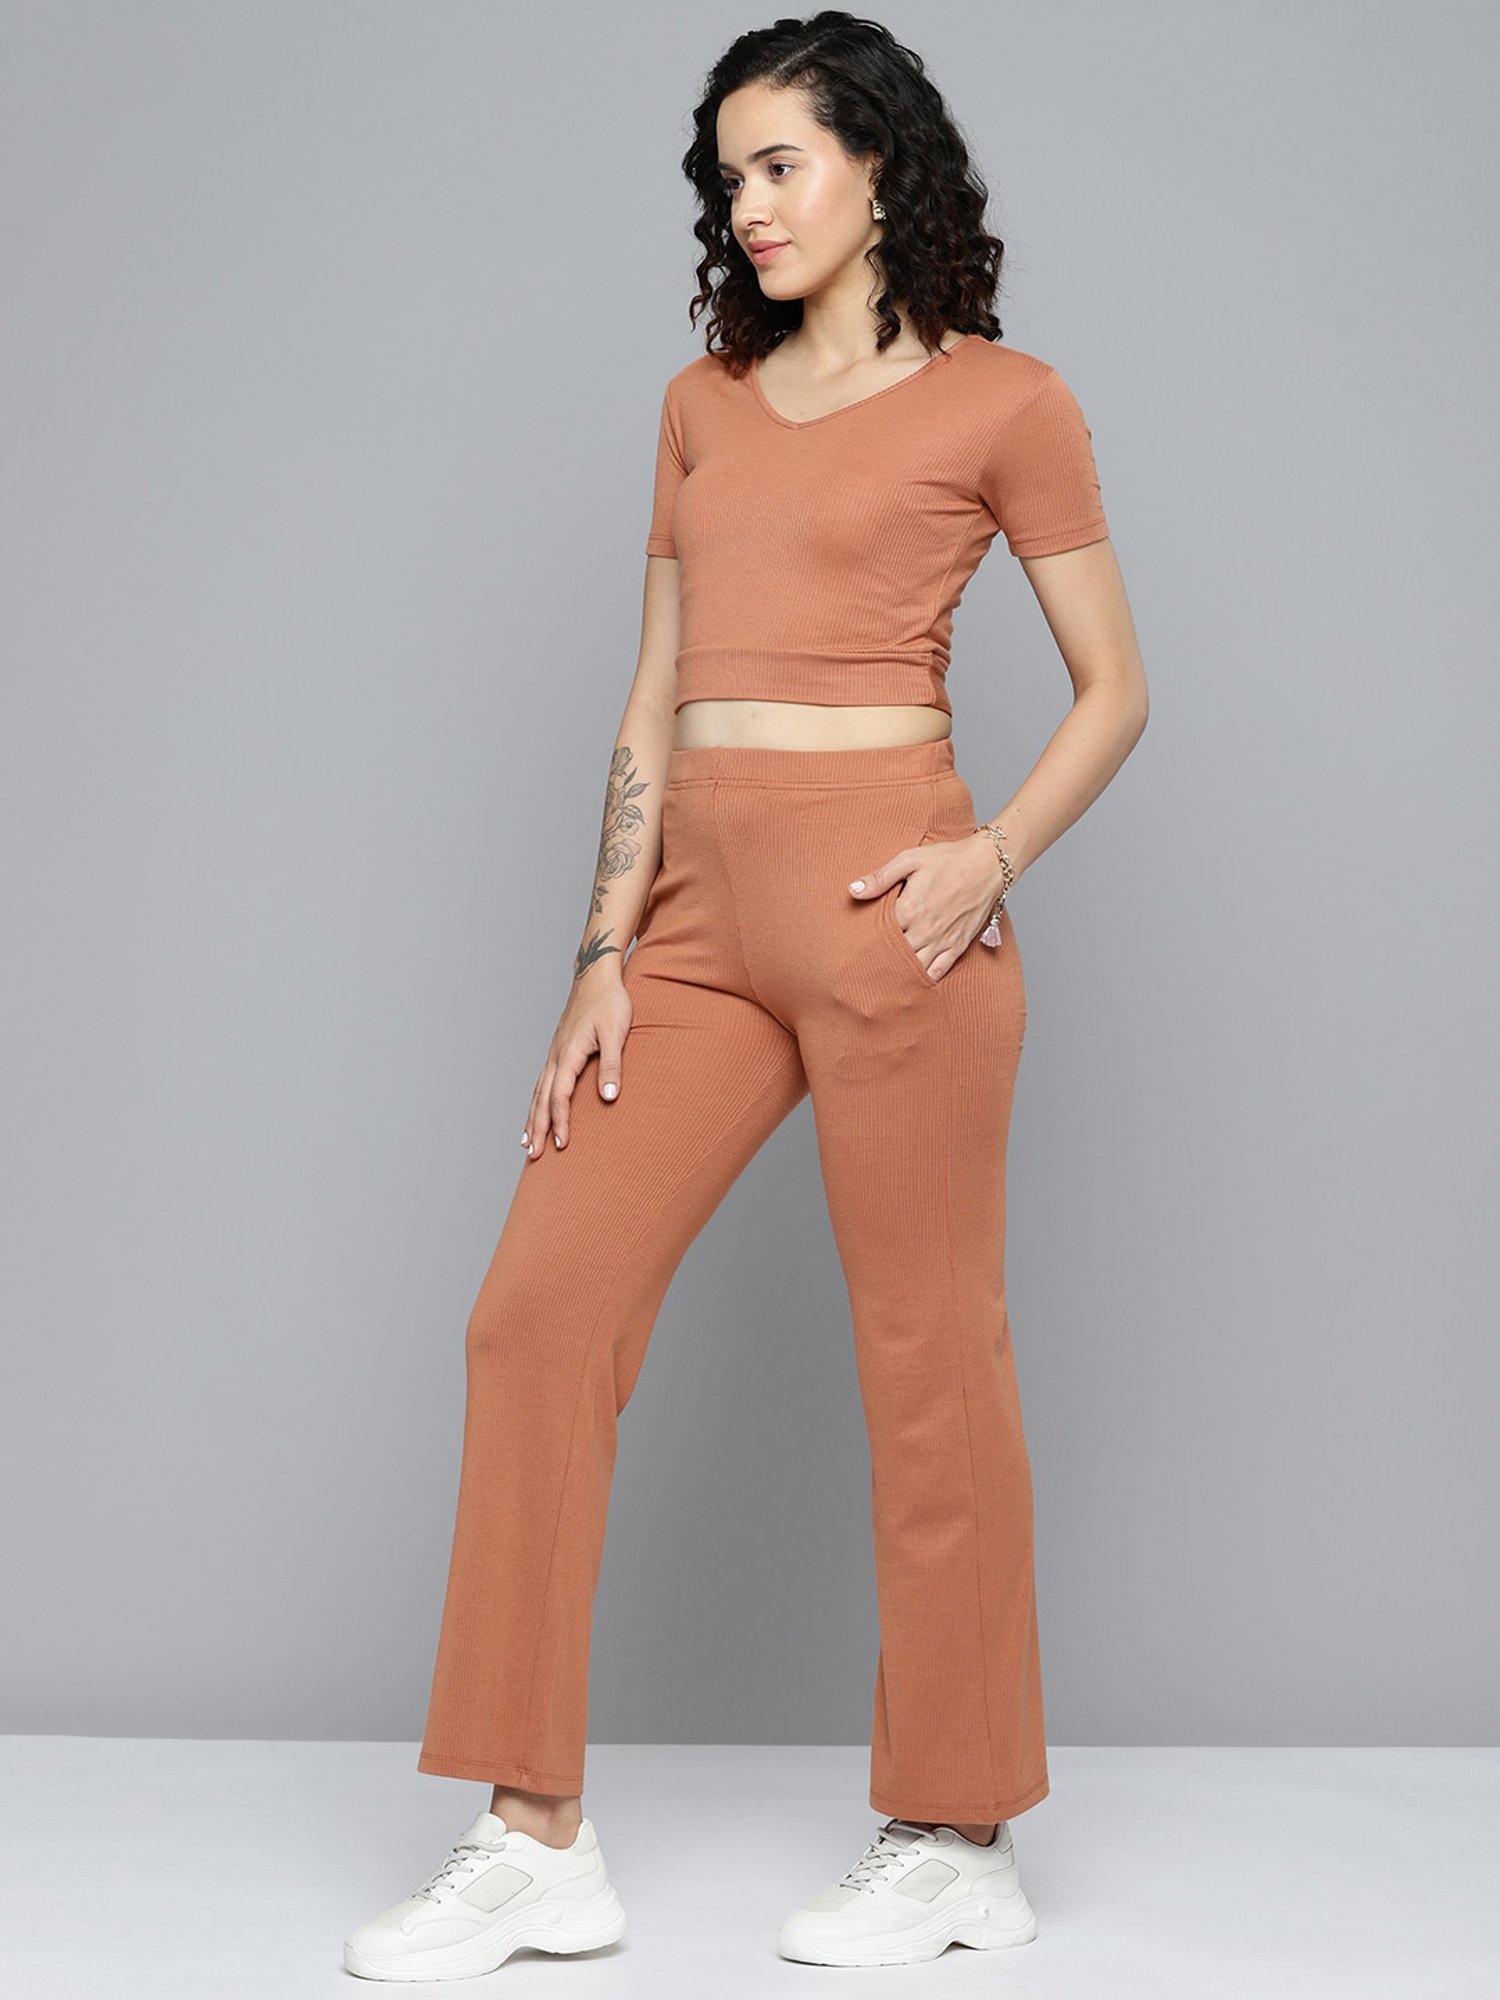 Buy DIAZ CoOrd Set with Stylish Crop top  High Waist Bell Bottom Pant Top   Bottom Set for Women  Outdoor Wear Lounge Wear Night Wear Suite Set  Western Top and